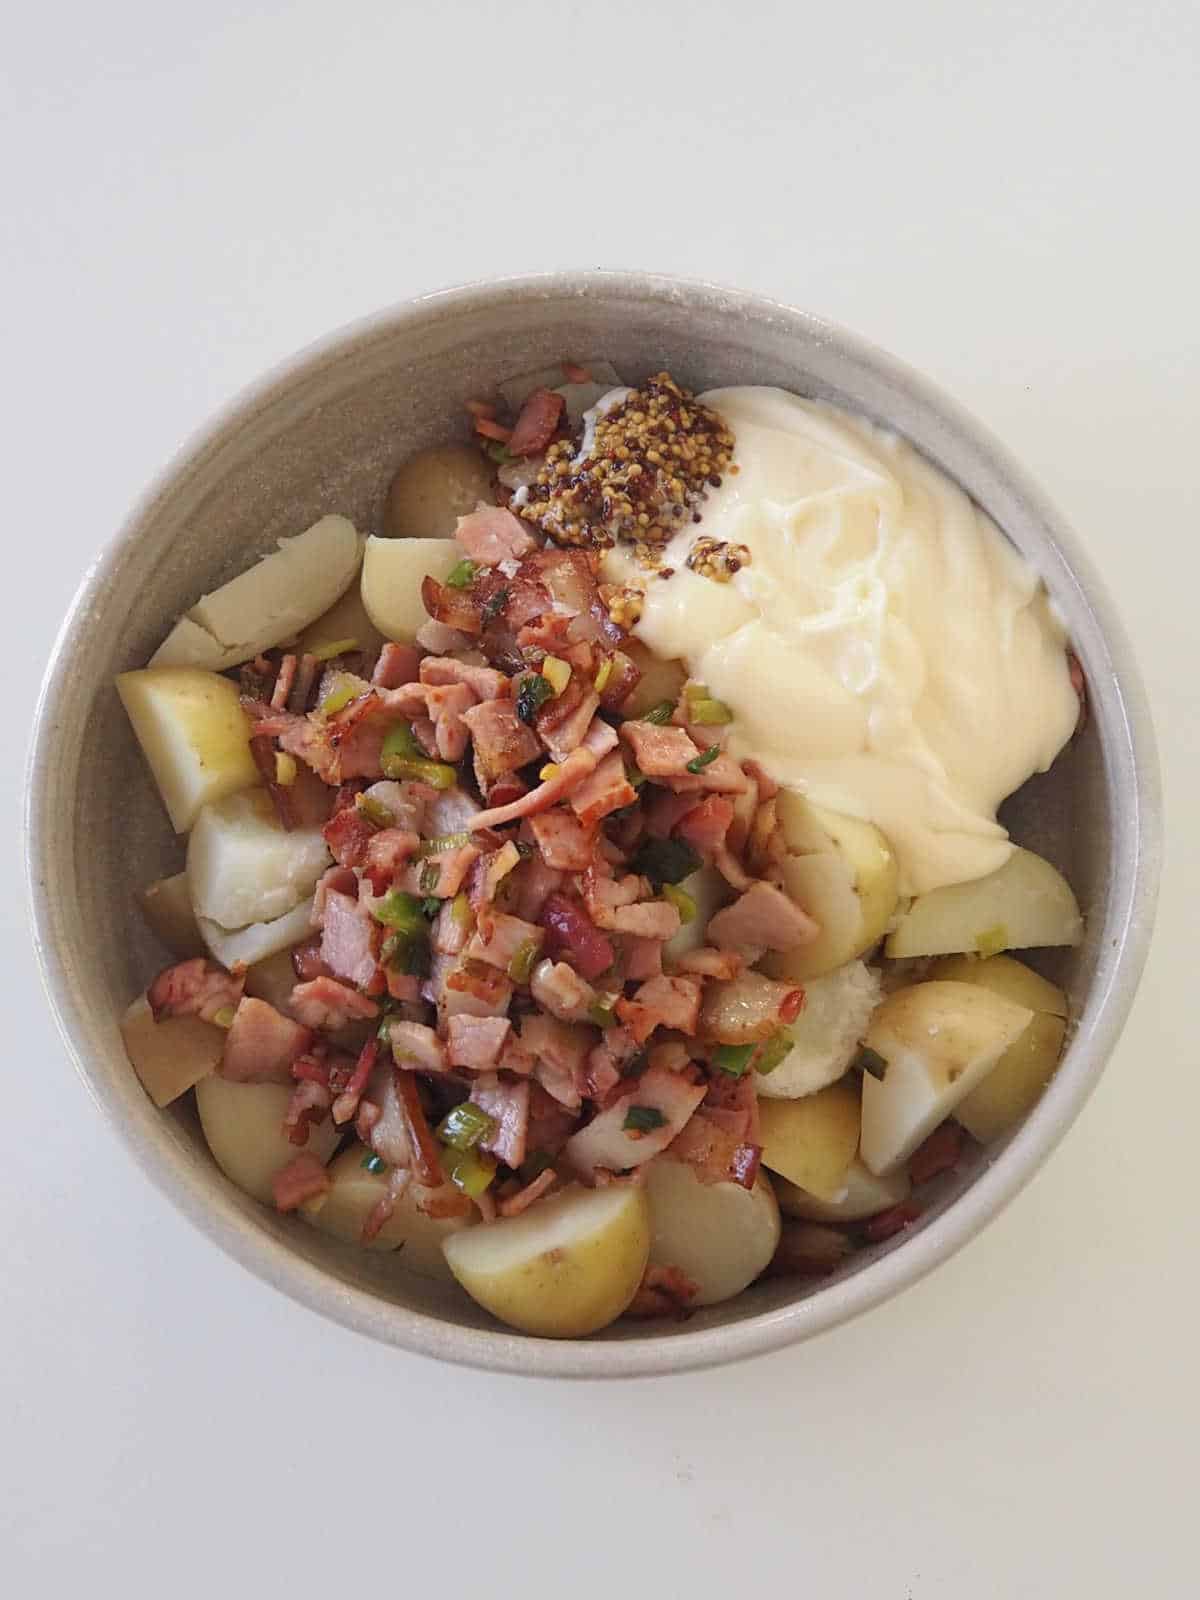 Potato Salad ingredients in serving bowl before being mixed together.